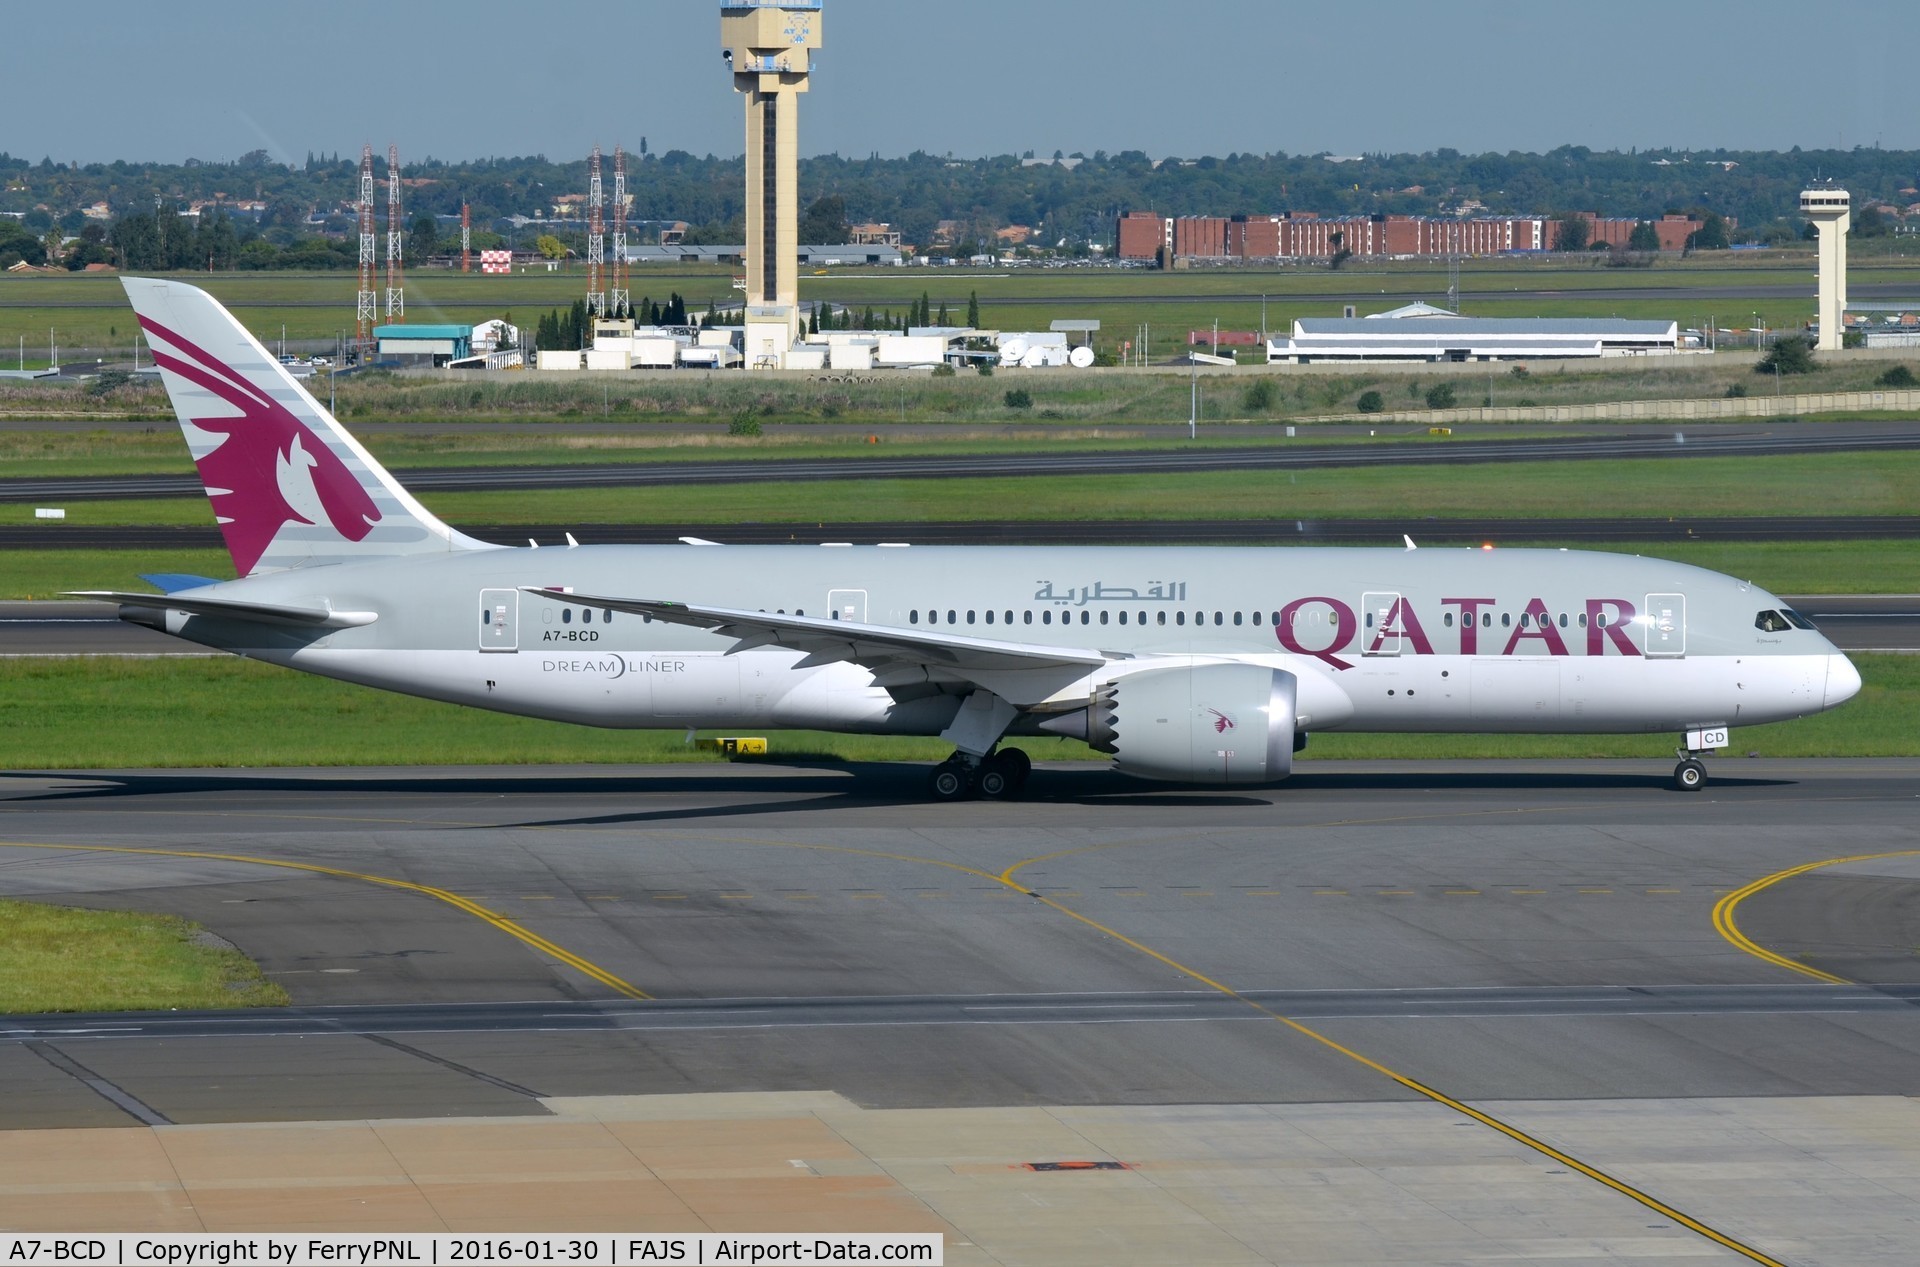 A7-BCD, 2013 Boeing 787-8 Dreamliner C/N 38322, Qatar B778 taxying-out for departure to Doha.